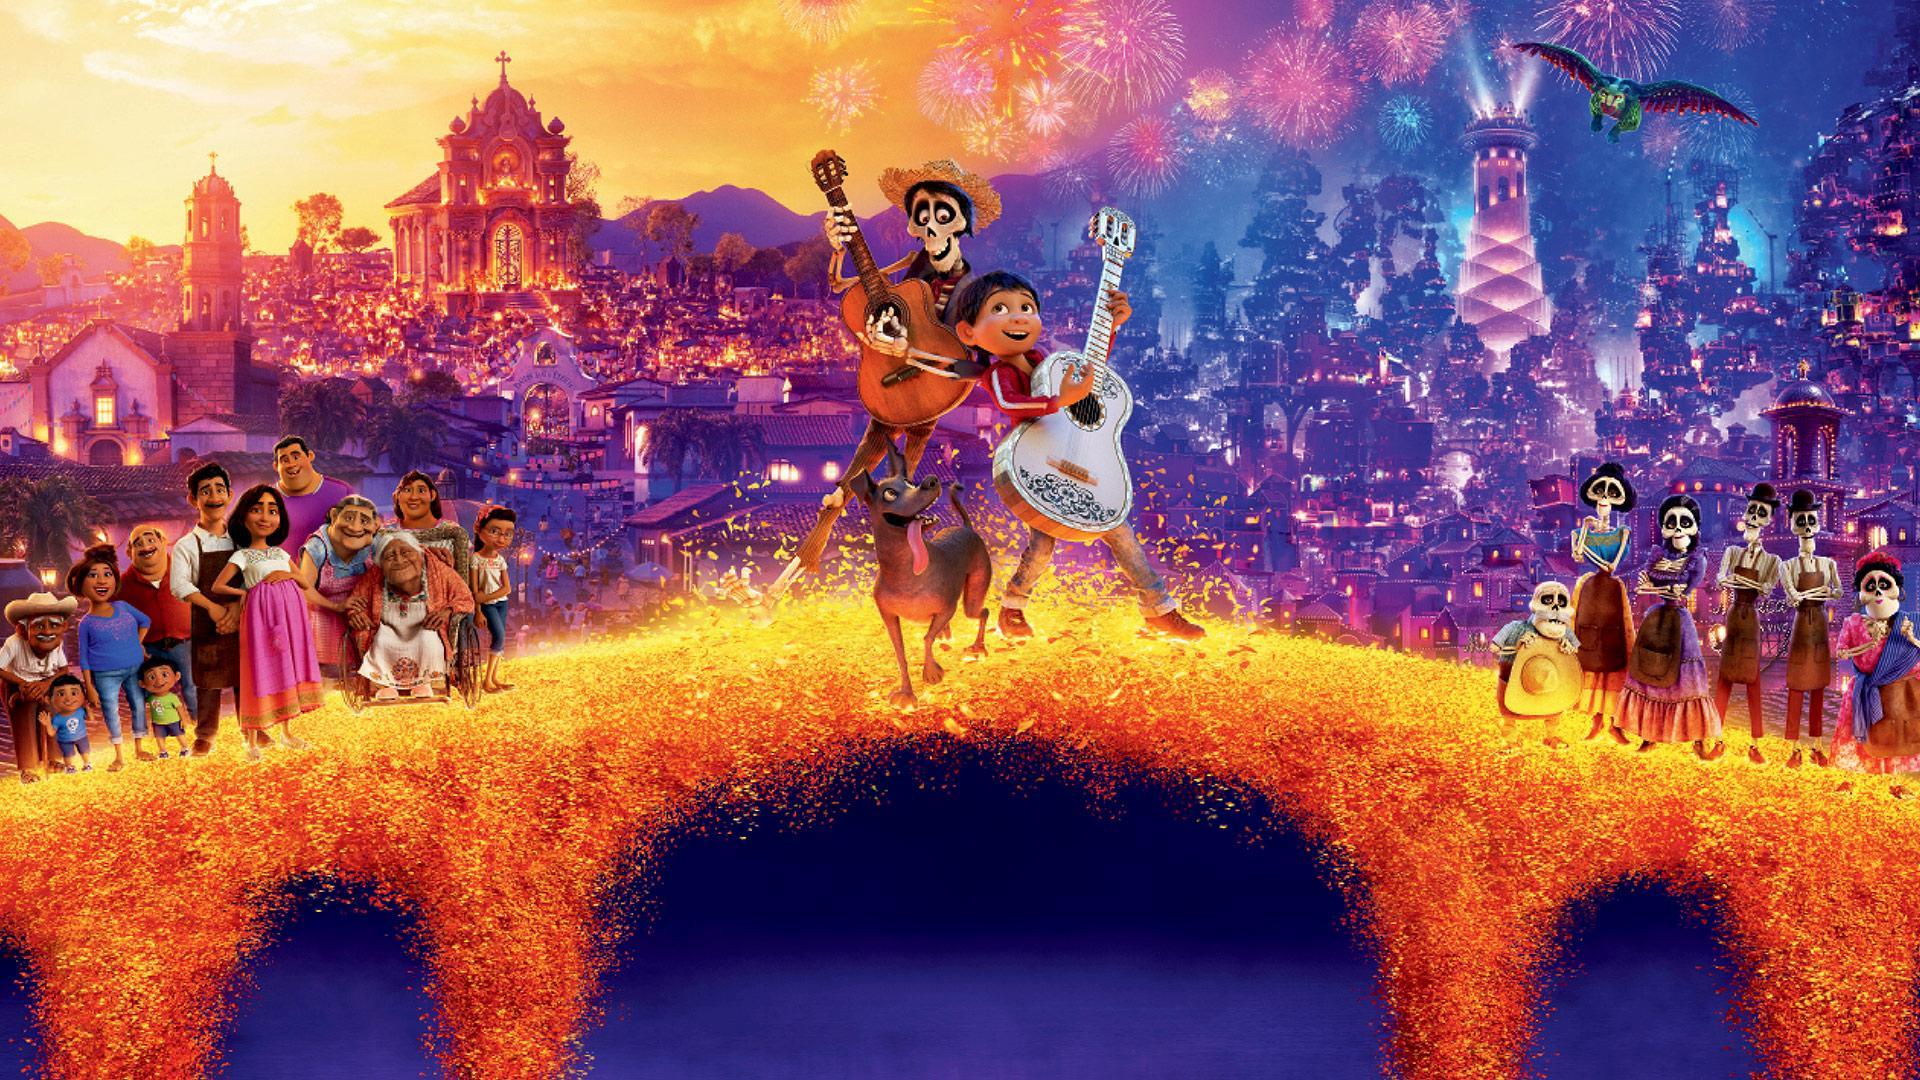 Download Coco Wallpaper Wallpaper For your screen